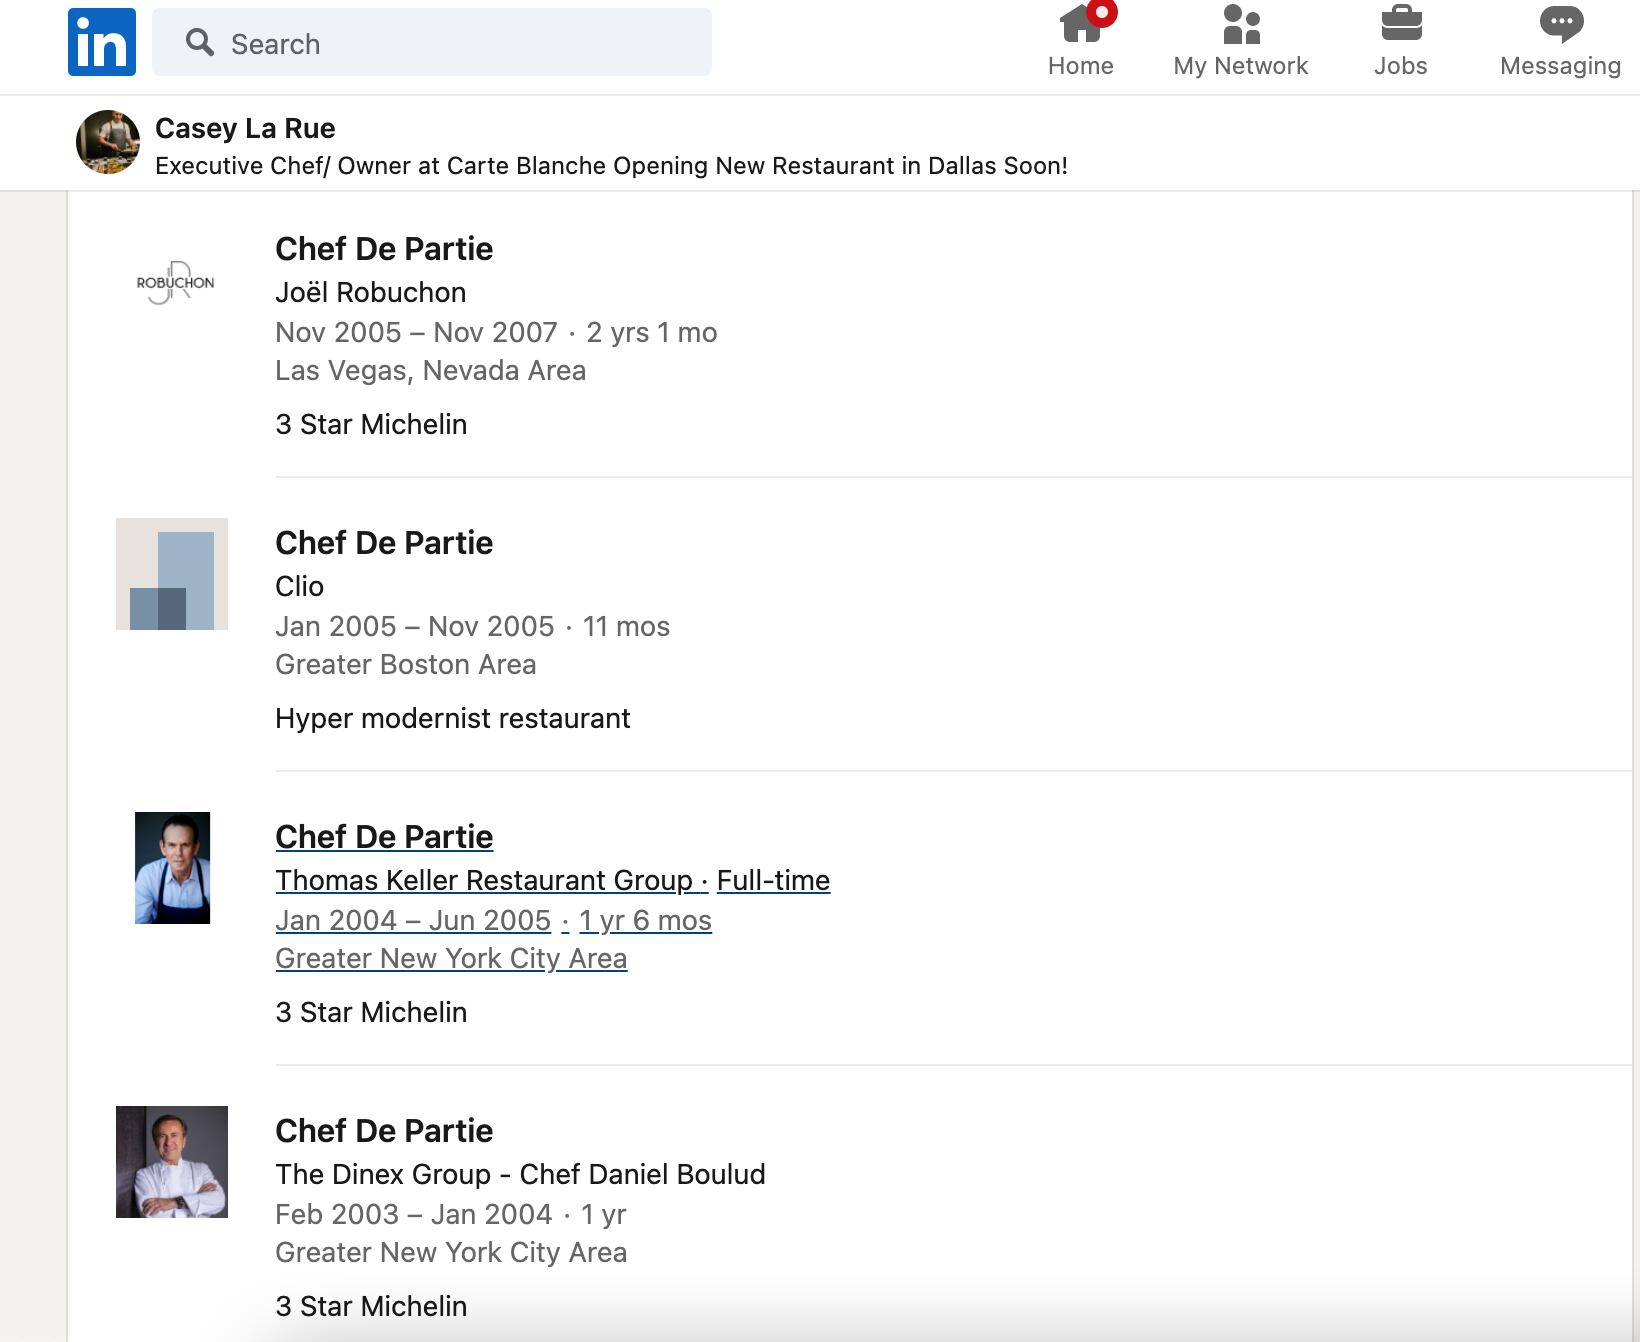 Casey La Rue's LinkedIn page on Sept 1, 2021 before his work history was removed.